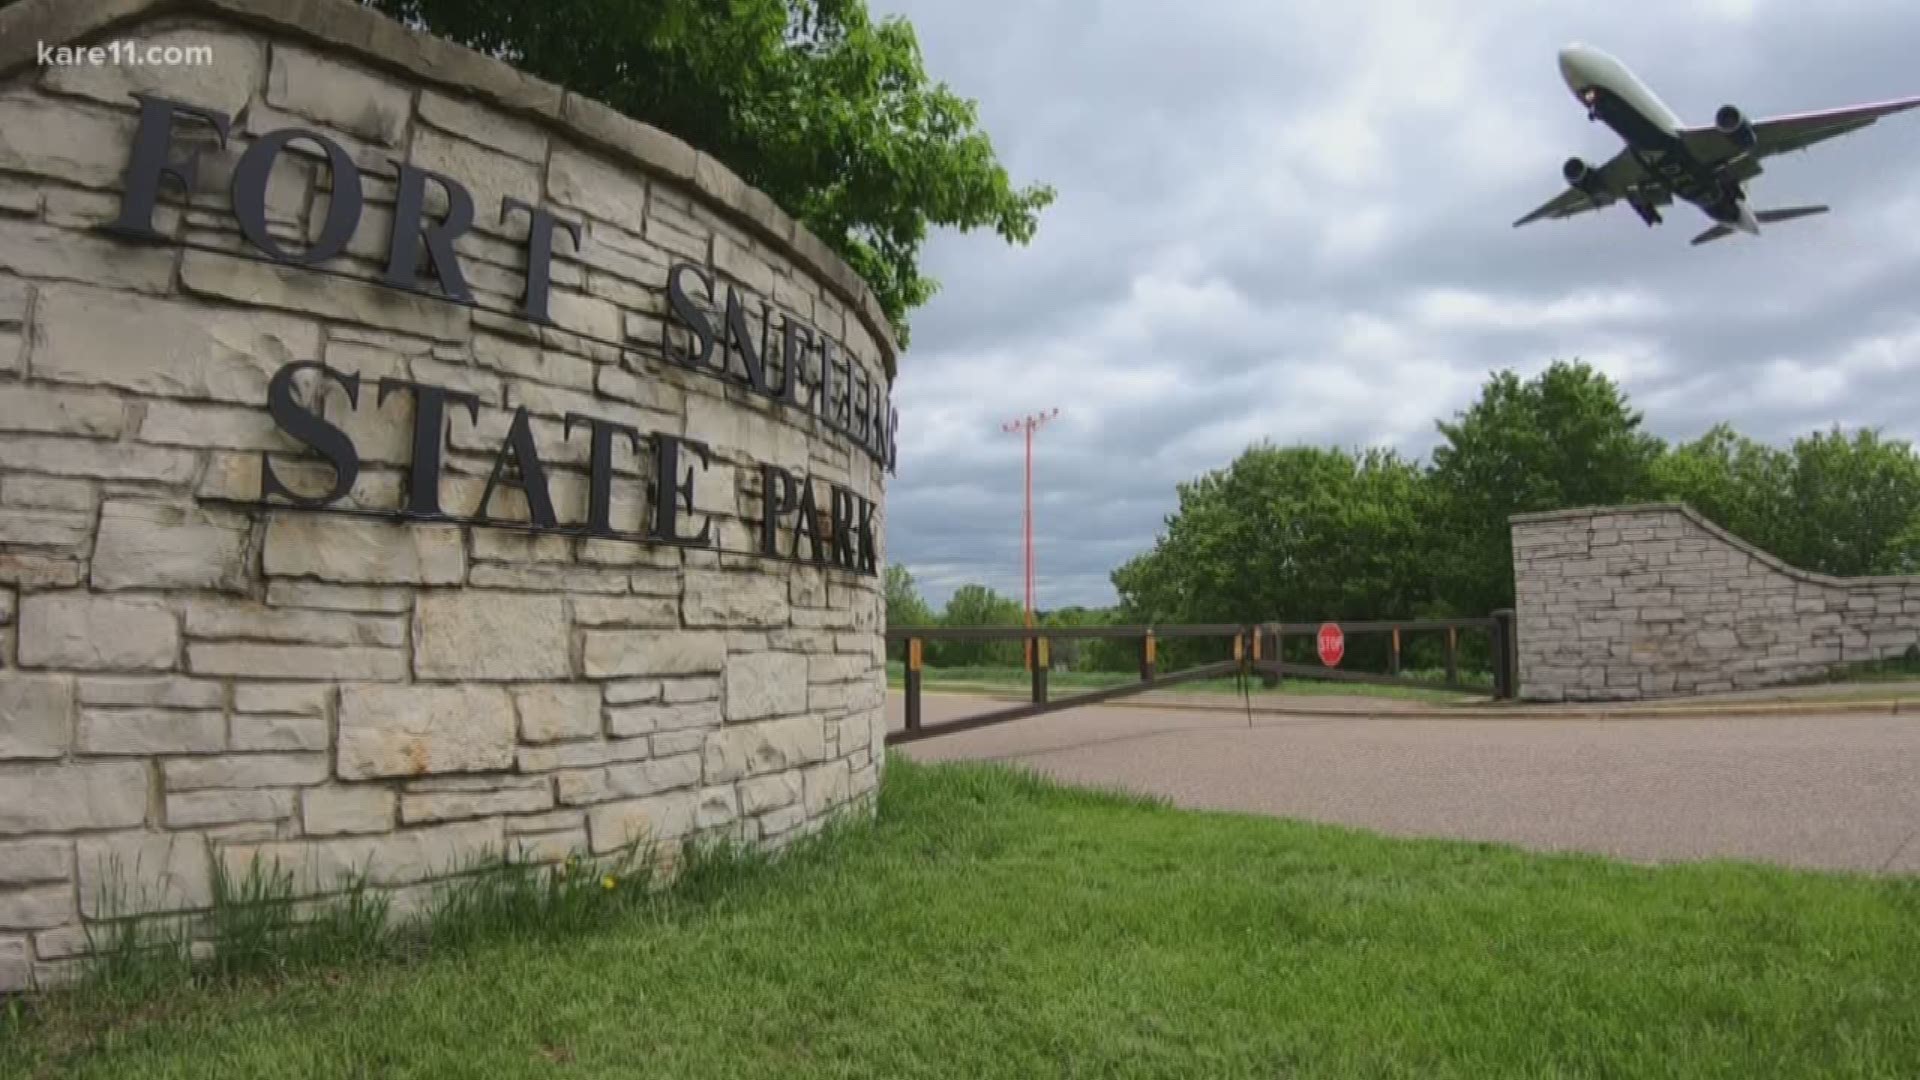 Spring flooding has taken a significant toll at Fort Snelling State Park, damaging roads and infrastructure that will keep the popular park closed.